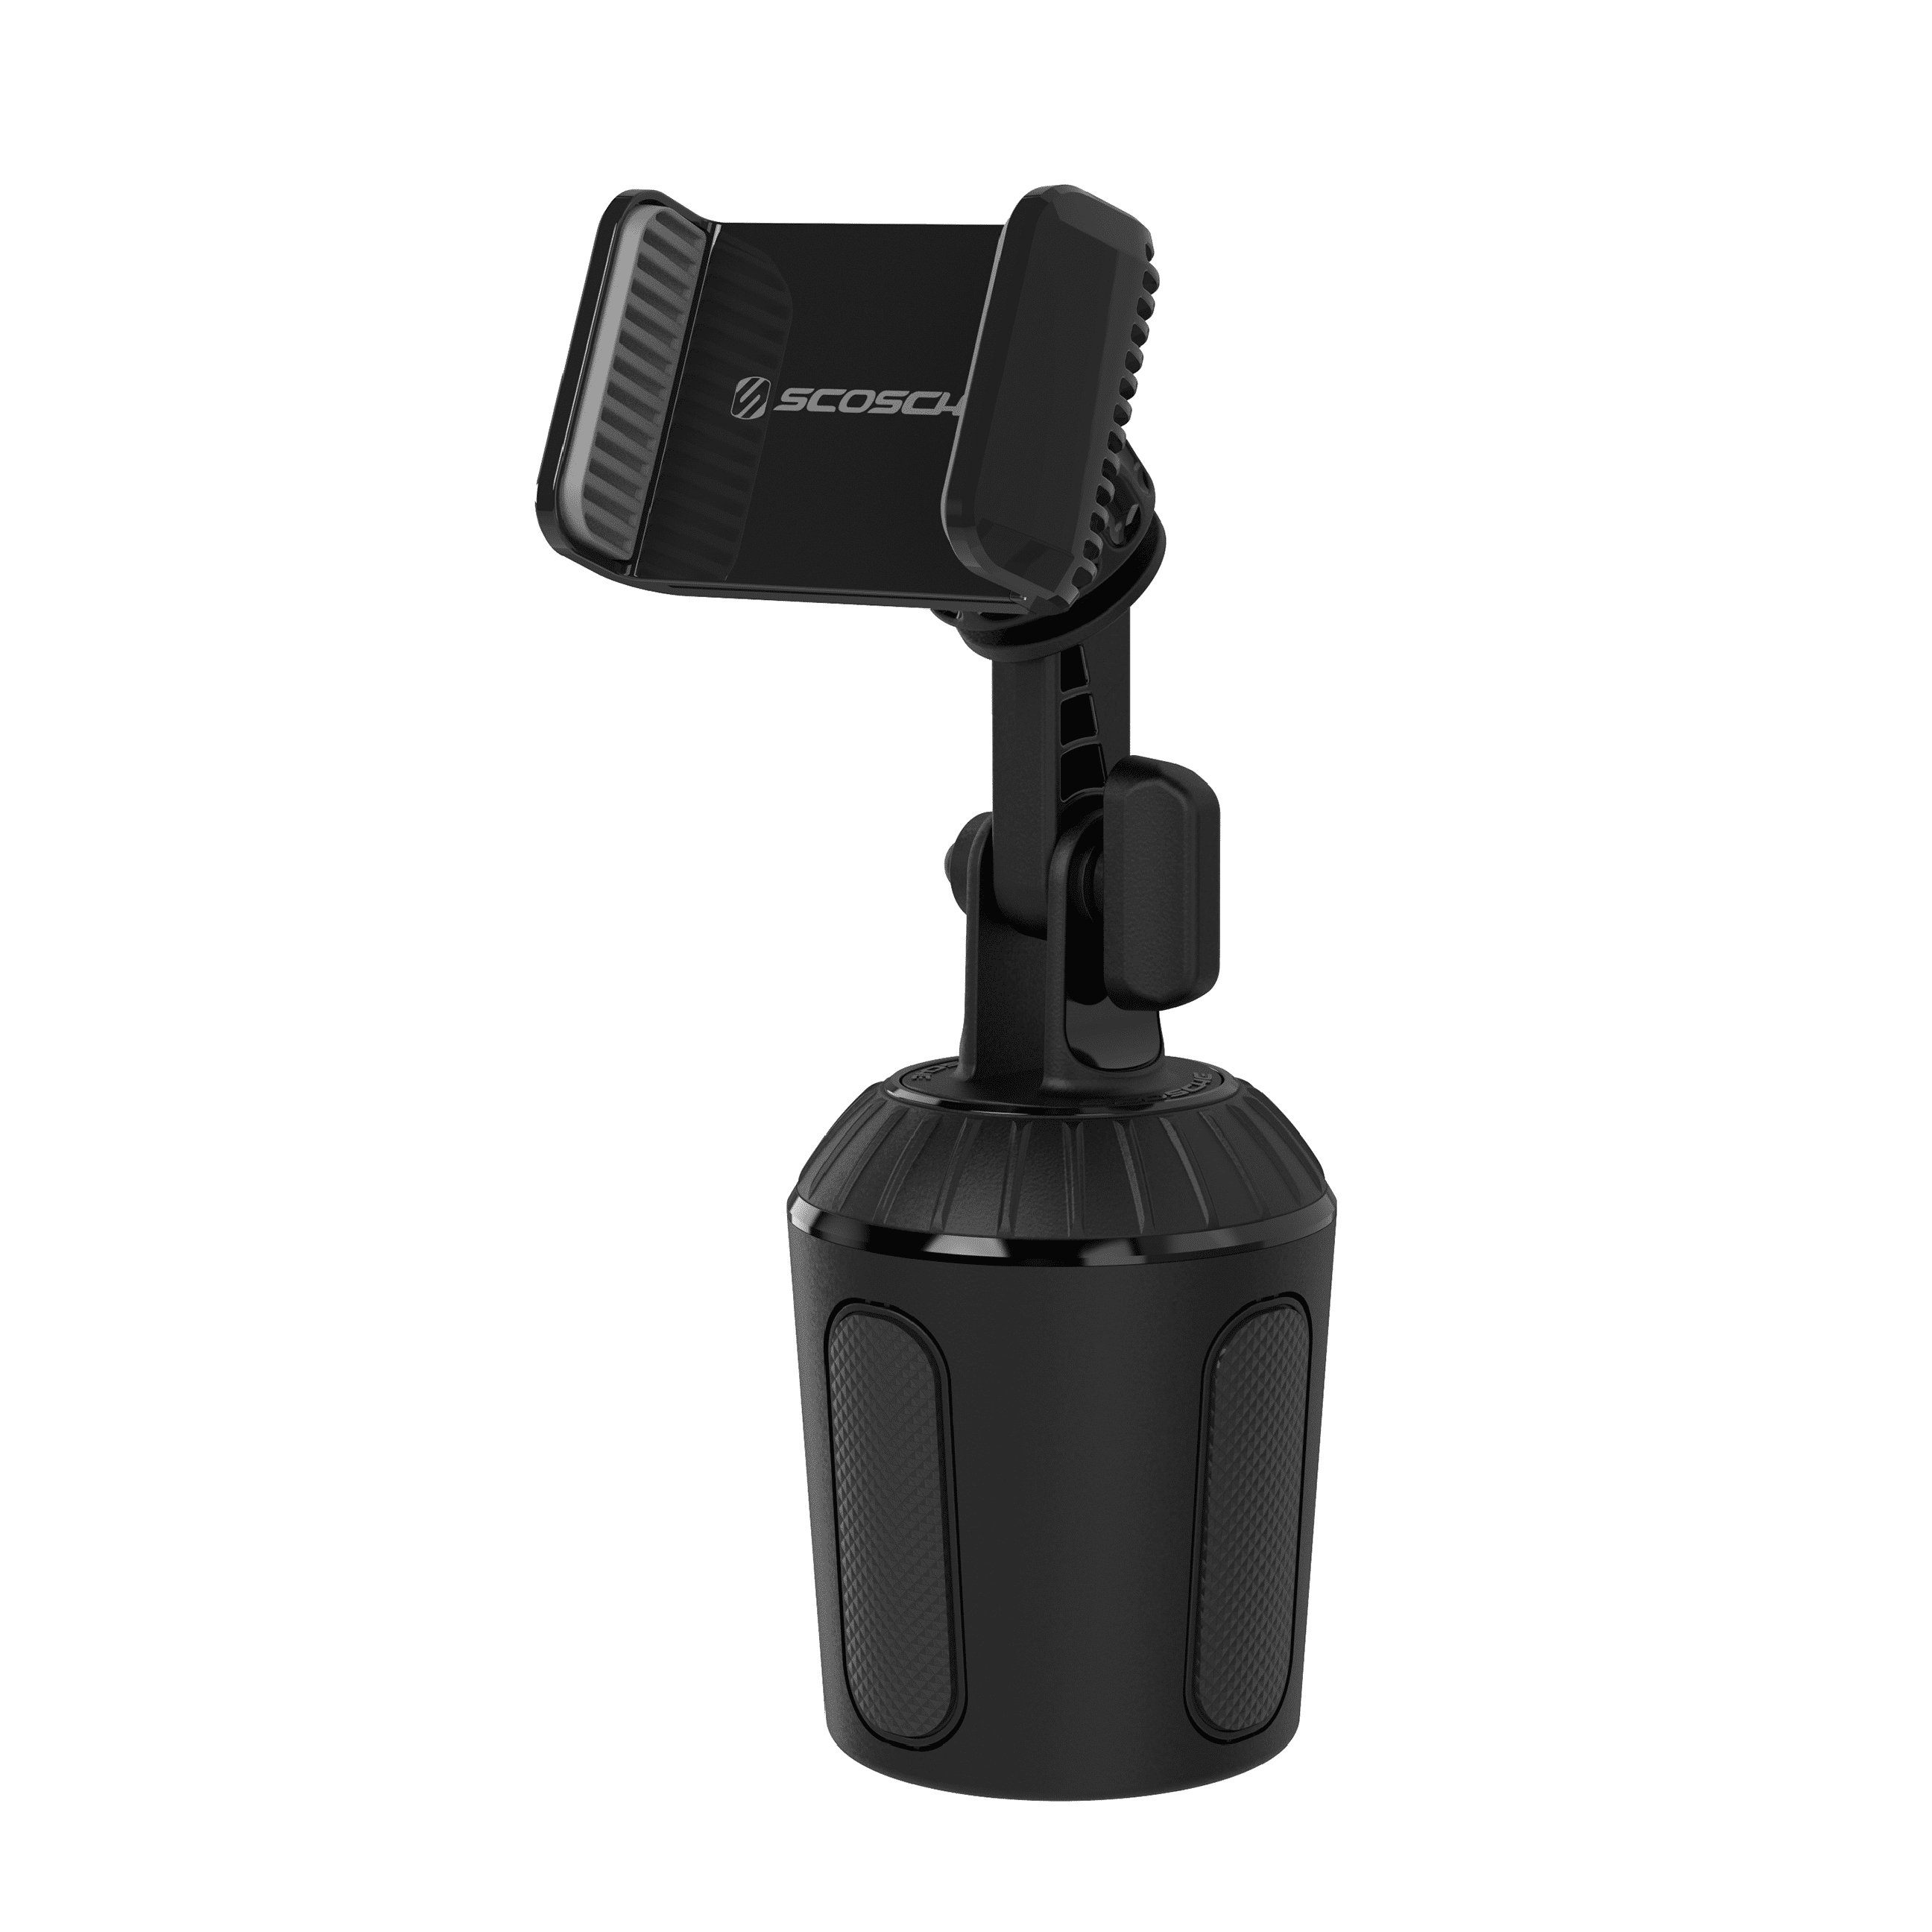 Scosche UHCUP2M-SP1 Universal Cup Phone Mount with Adjustable Arms